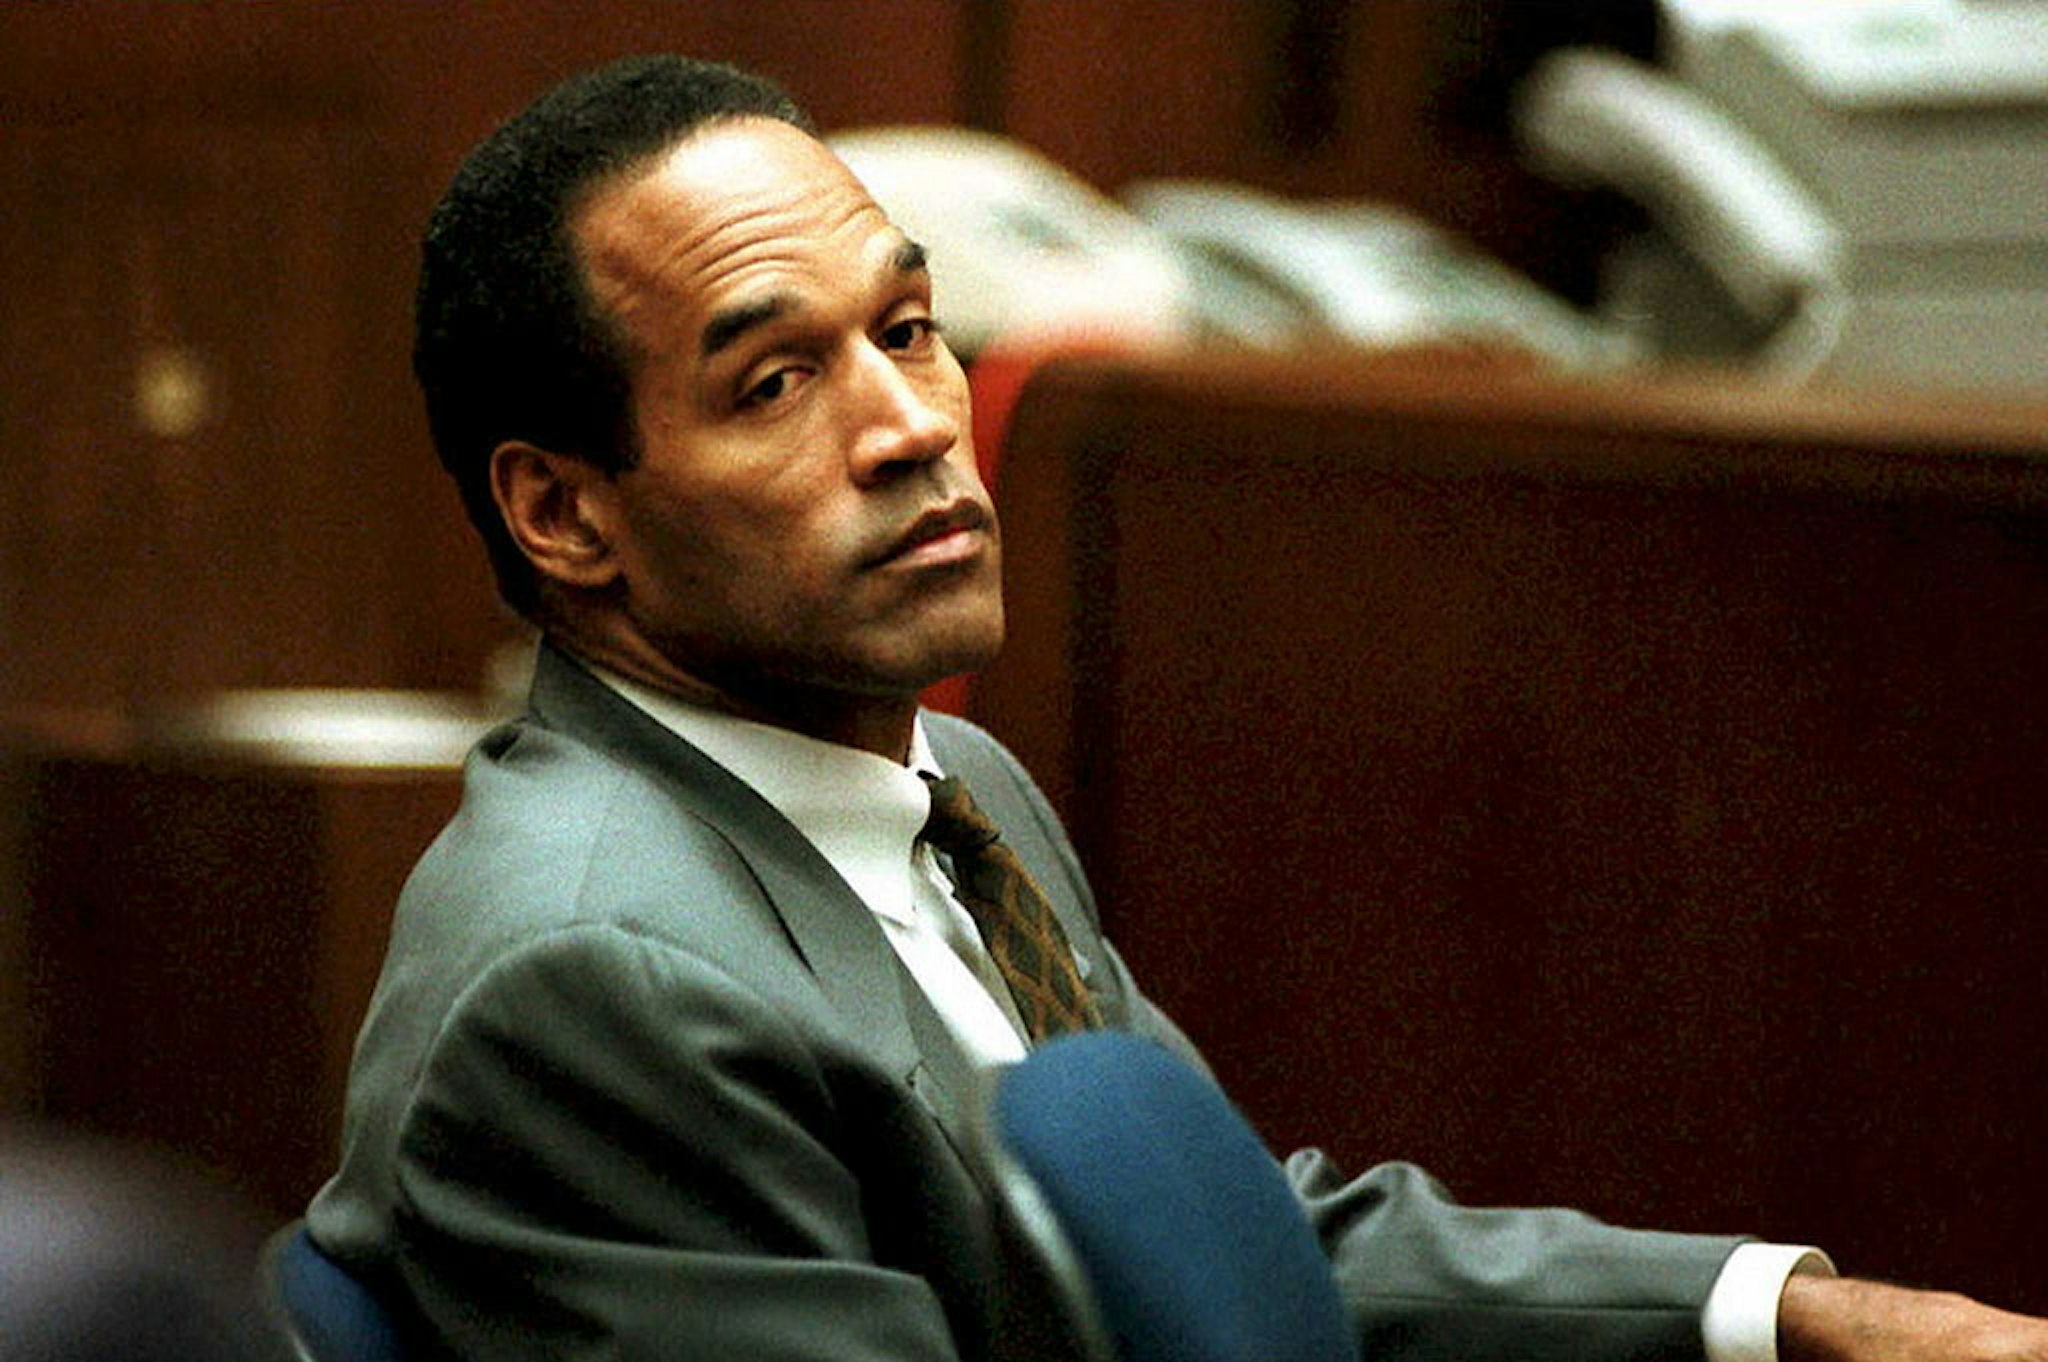 LOS ANGELES, CA - DECEMBER 8: O. J. Simpson sits in Superior Court in Los Angeles 08 December 1994 during an open court session where Judge Lance Ito denied a media attorney's request to open court transcripts from a 07 December private meeting involving prospective jurors. Final selection of alternate jurors by attorneys in the double murder case is expected later this afternoon. (Photo credit should read POOL/AFP via Getty Images)